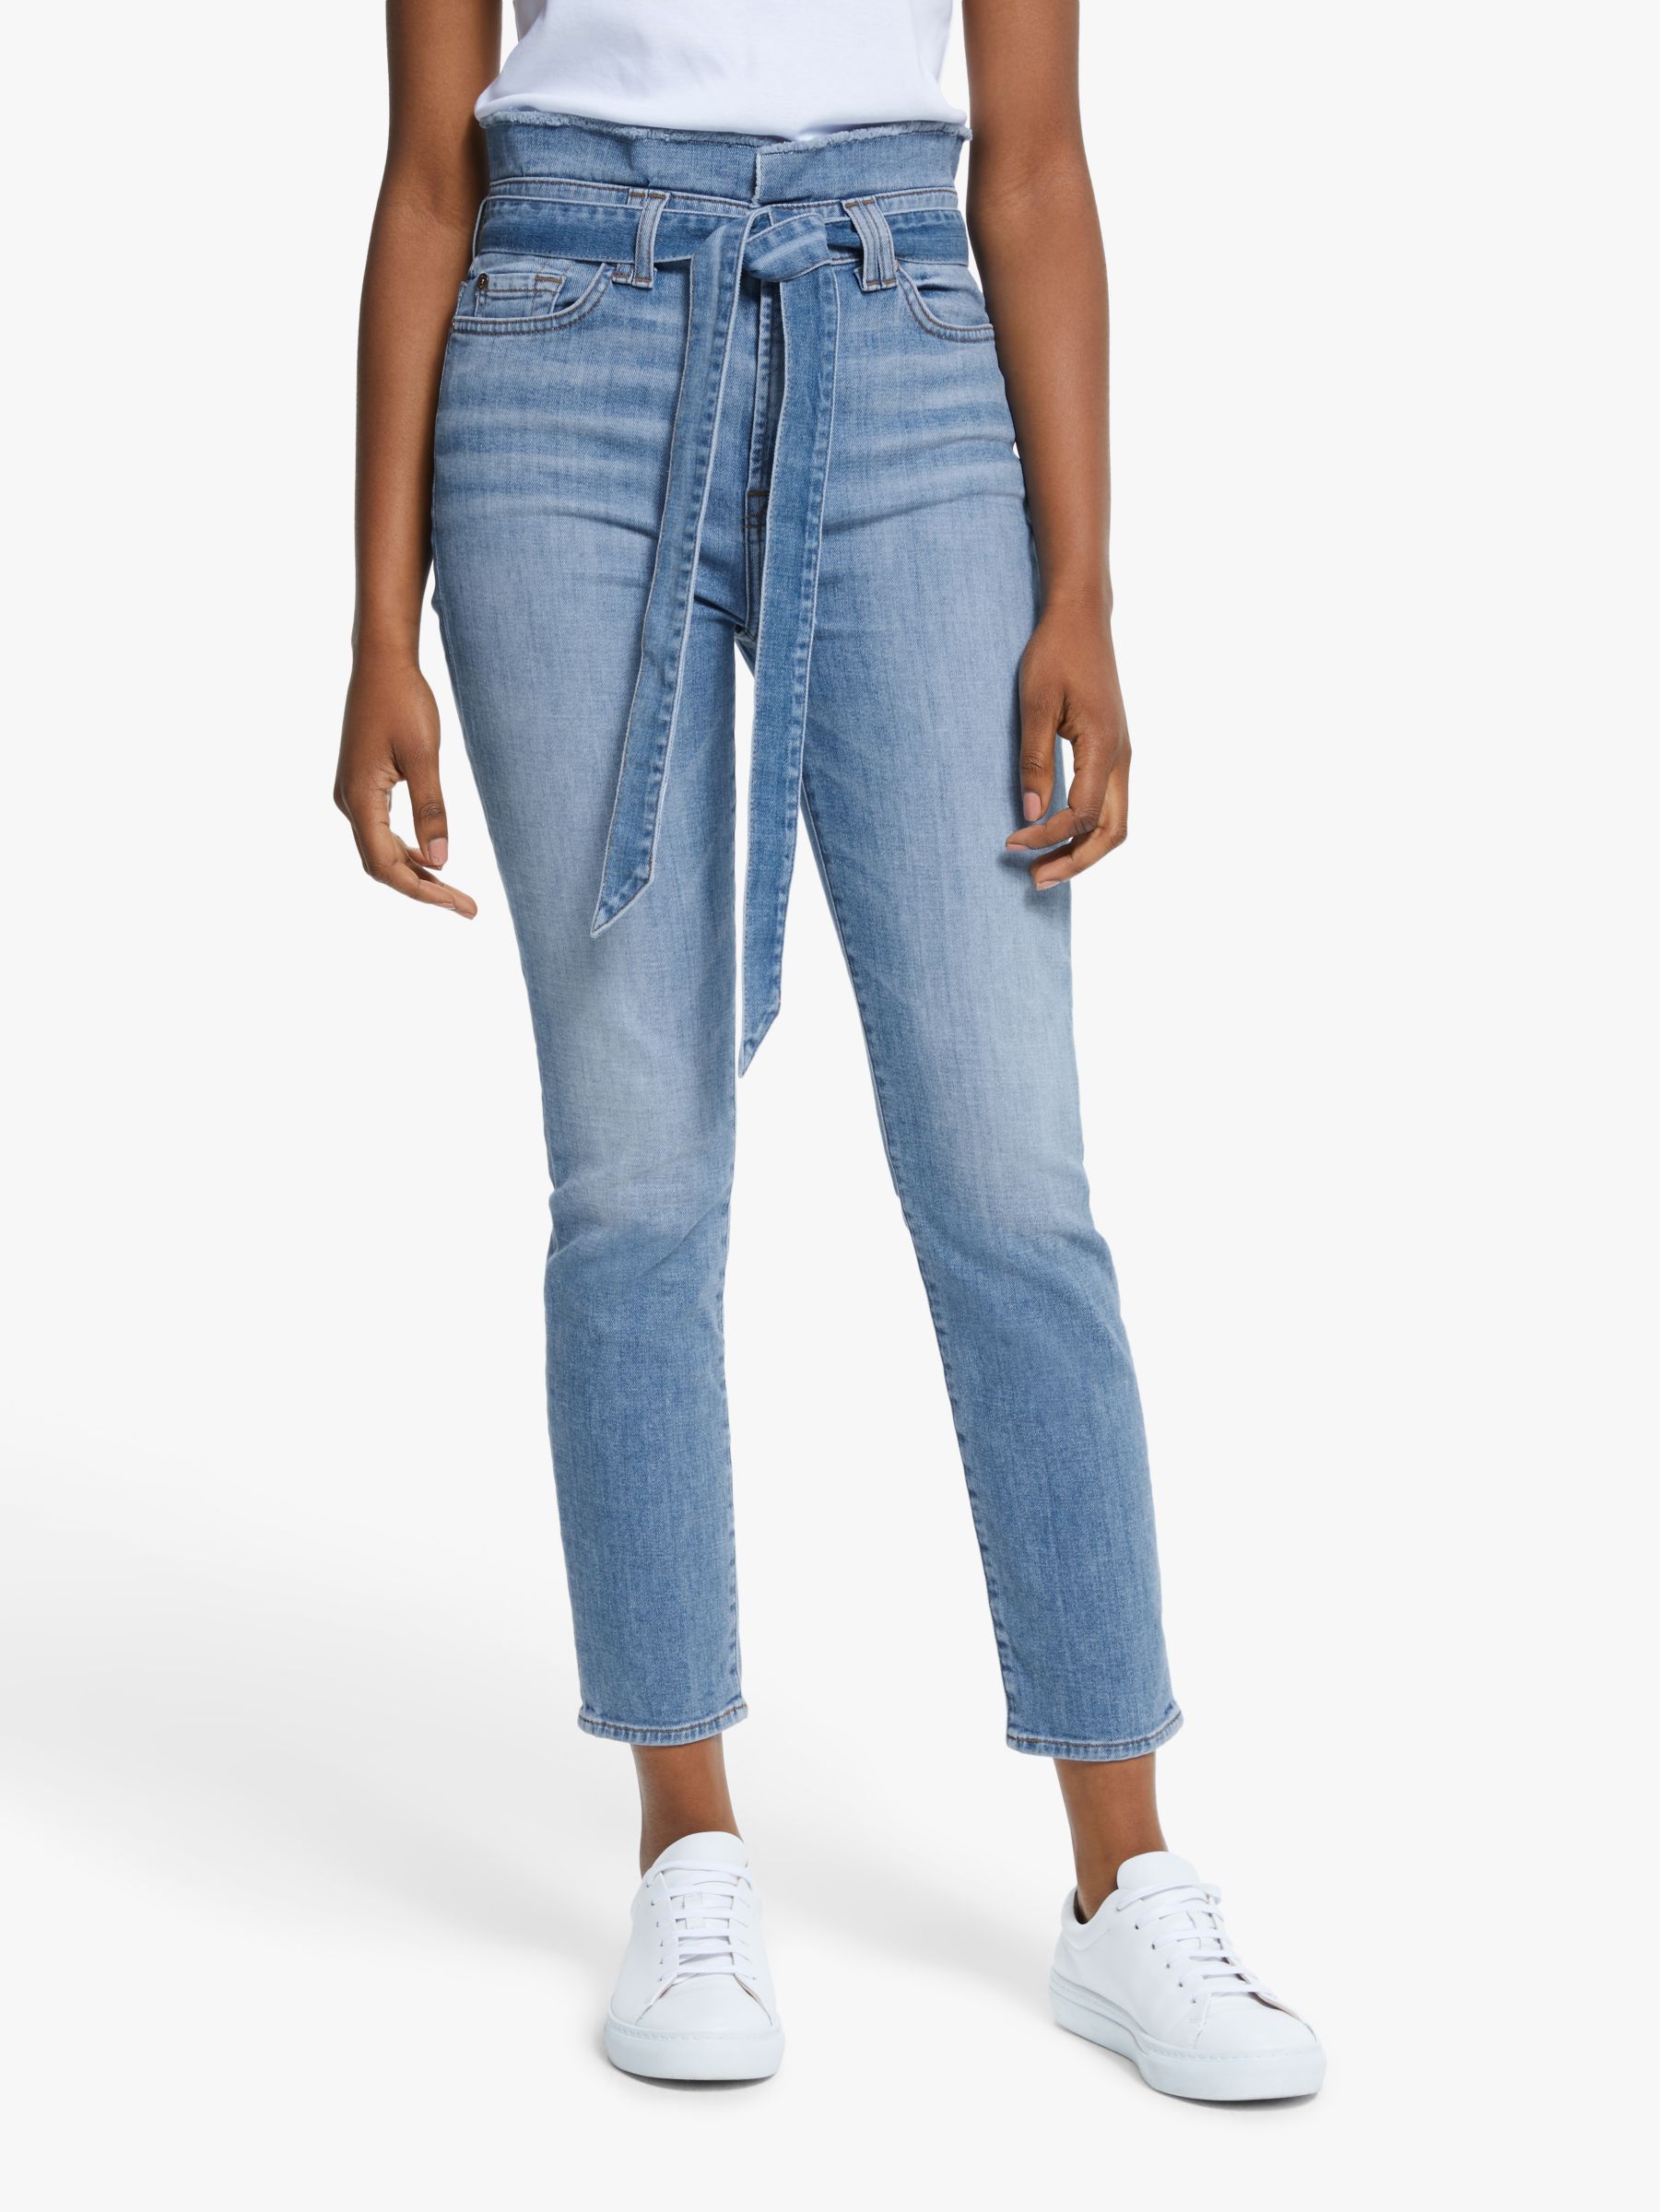 7 for all mankind roxanne paper bag